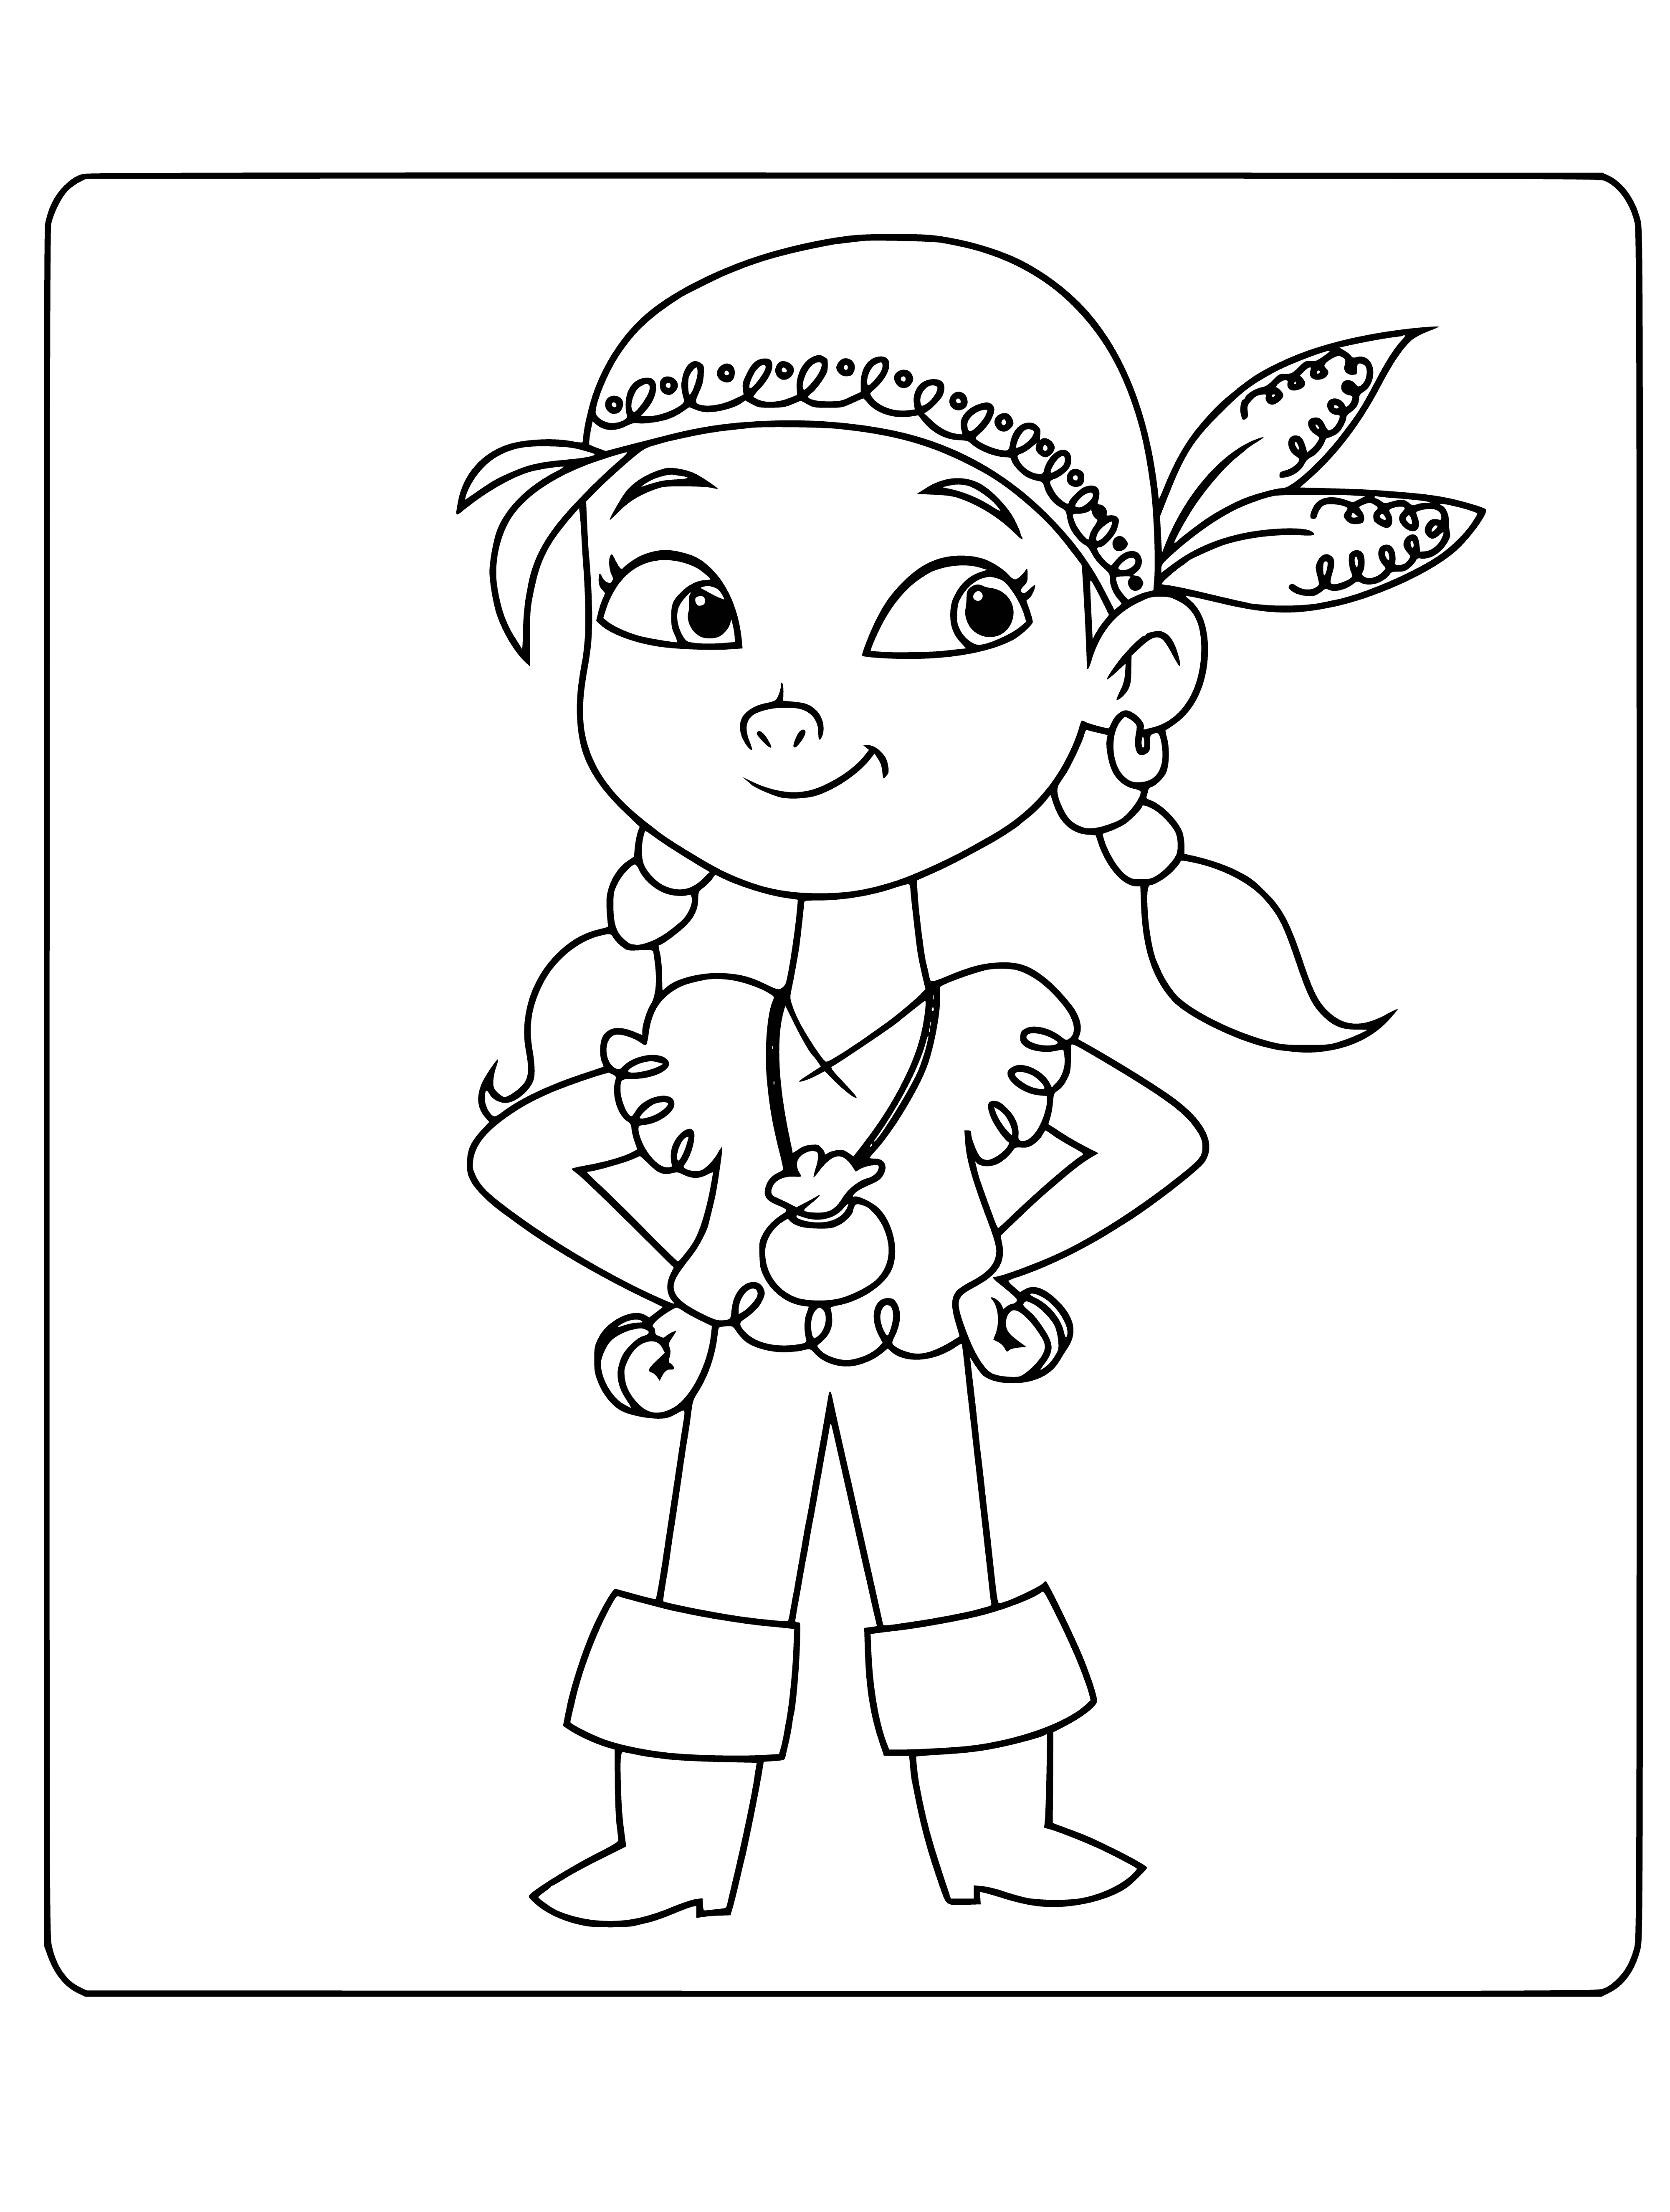 coloring page: Izzi is a small girl with dark skin and black hair who wears a pink and purple dress. She's helpful and ready to lend a friend a hand.